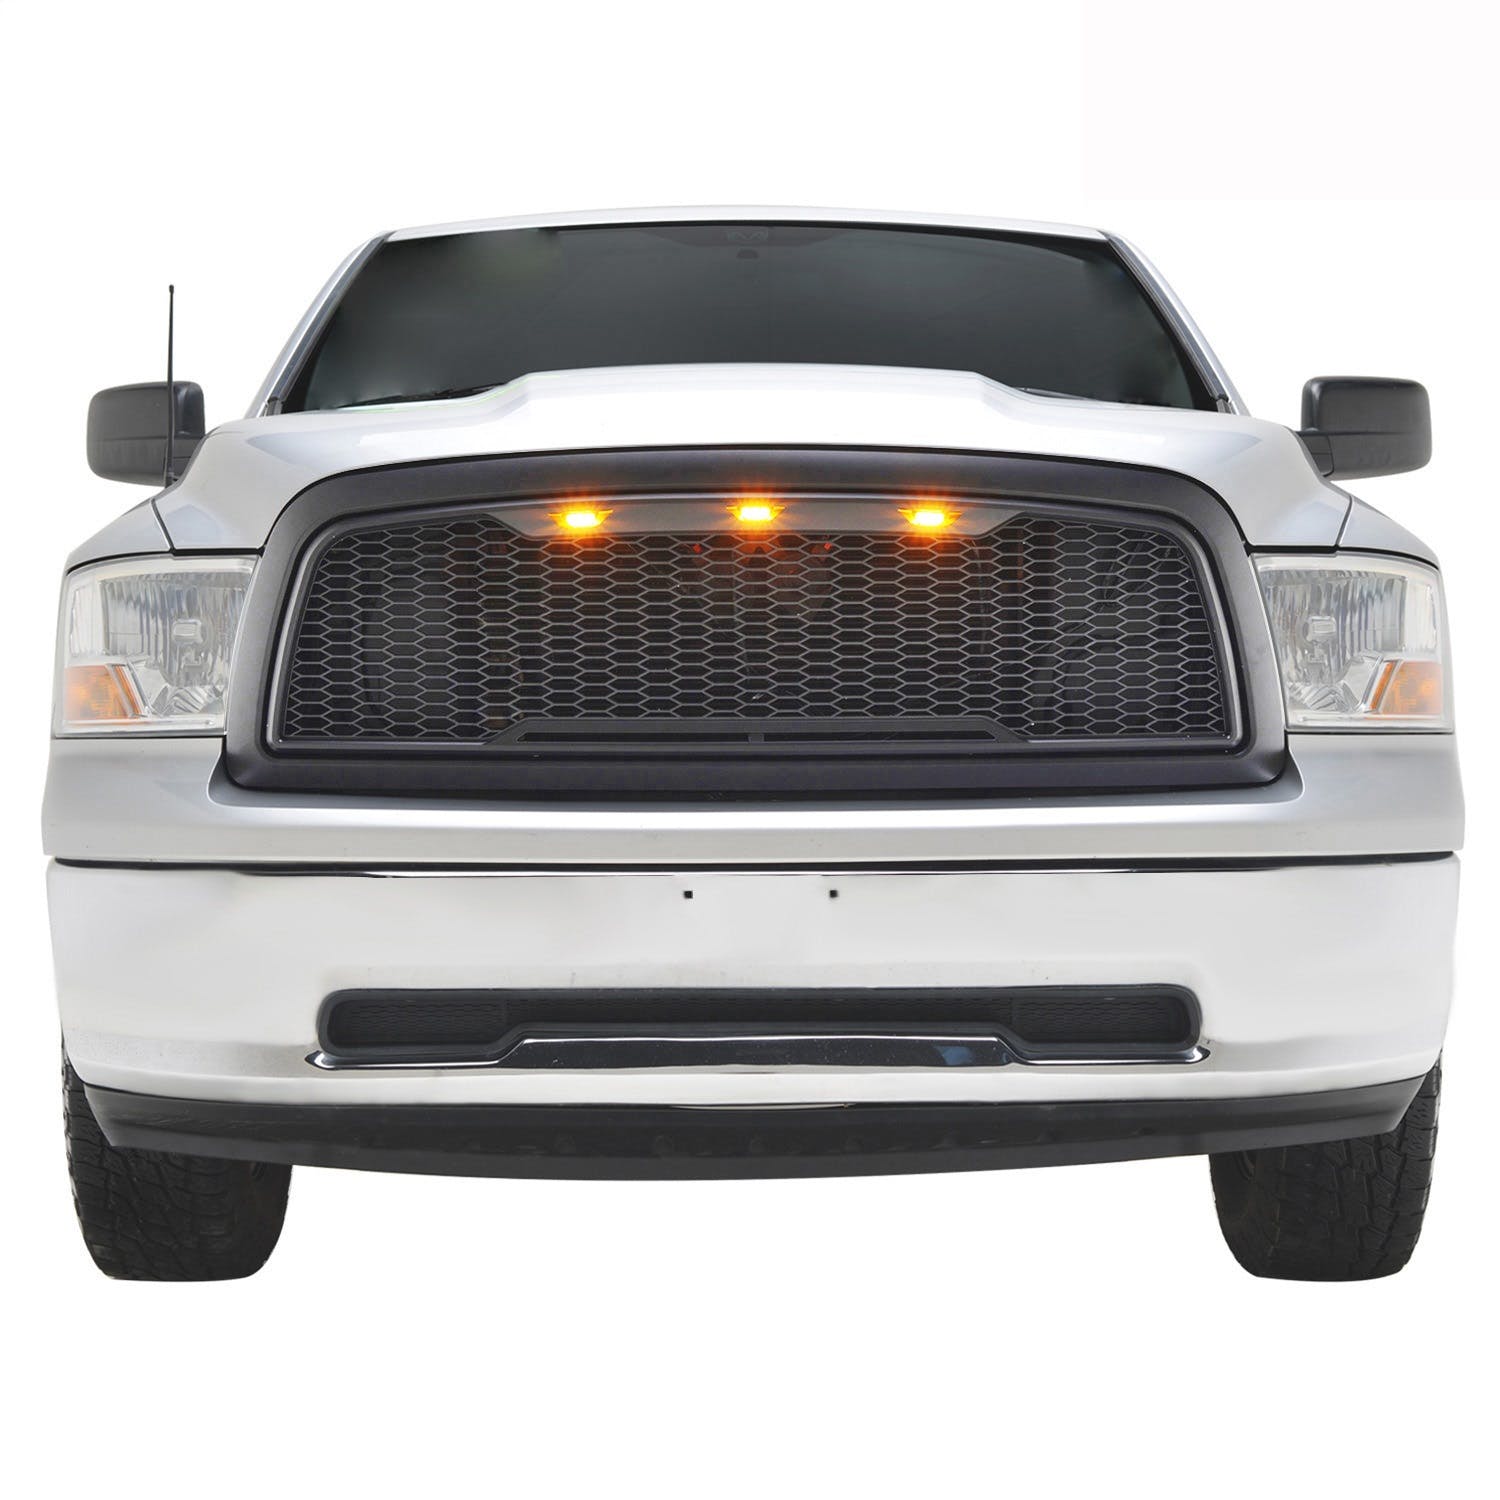 Paramount Automotive 41-0180MB Impulse Mesh Packaged Grille, Matte Black with Amber LEDs